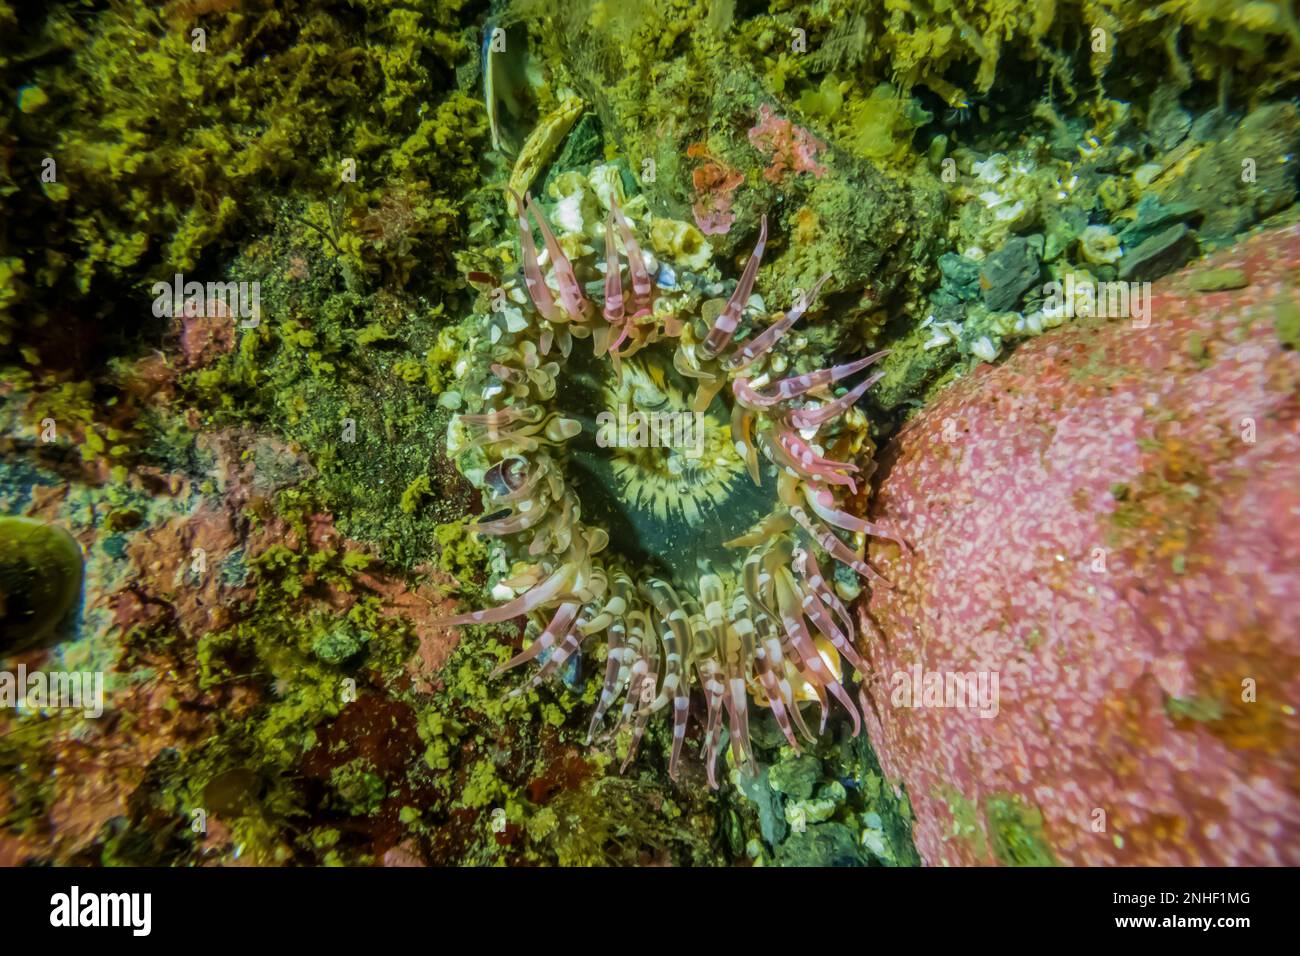 Sepolto Anemone Verde, Anthopleura artemisia, presso Point of Arches, nell'Olympic National Park, Washington state, USA Foto Stock